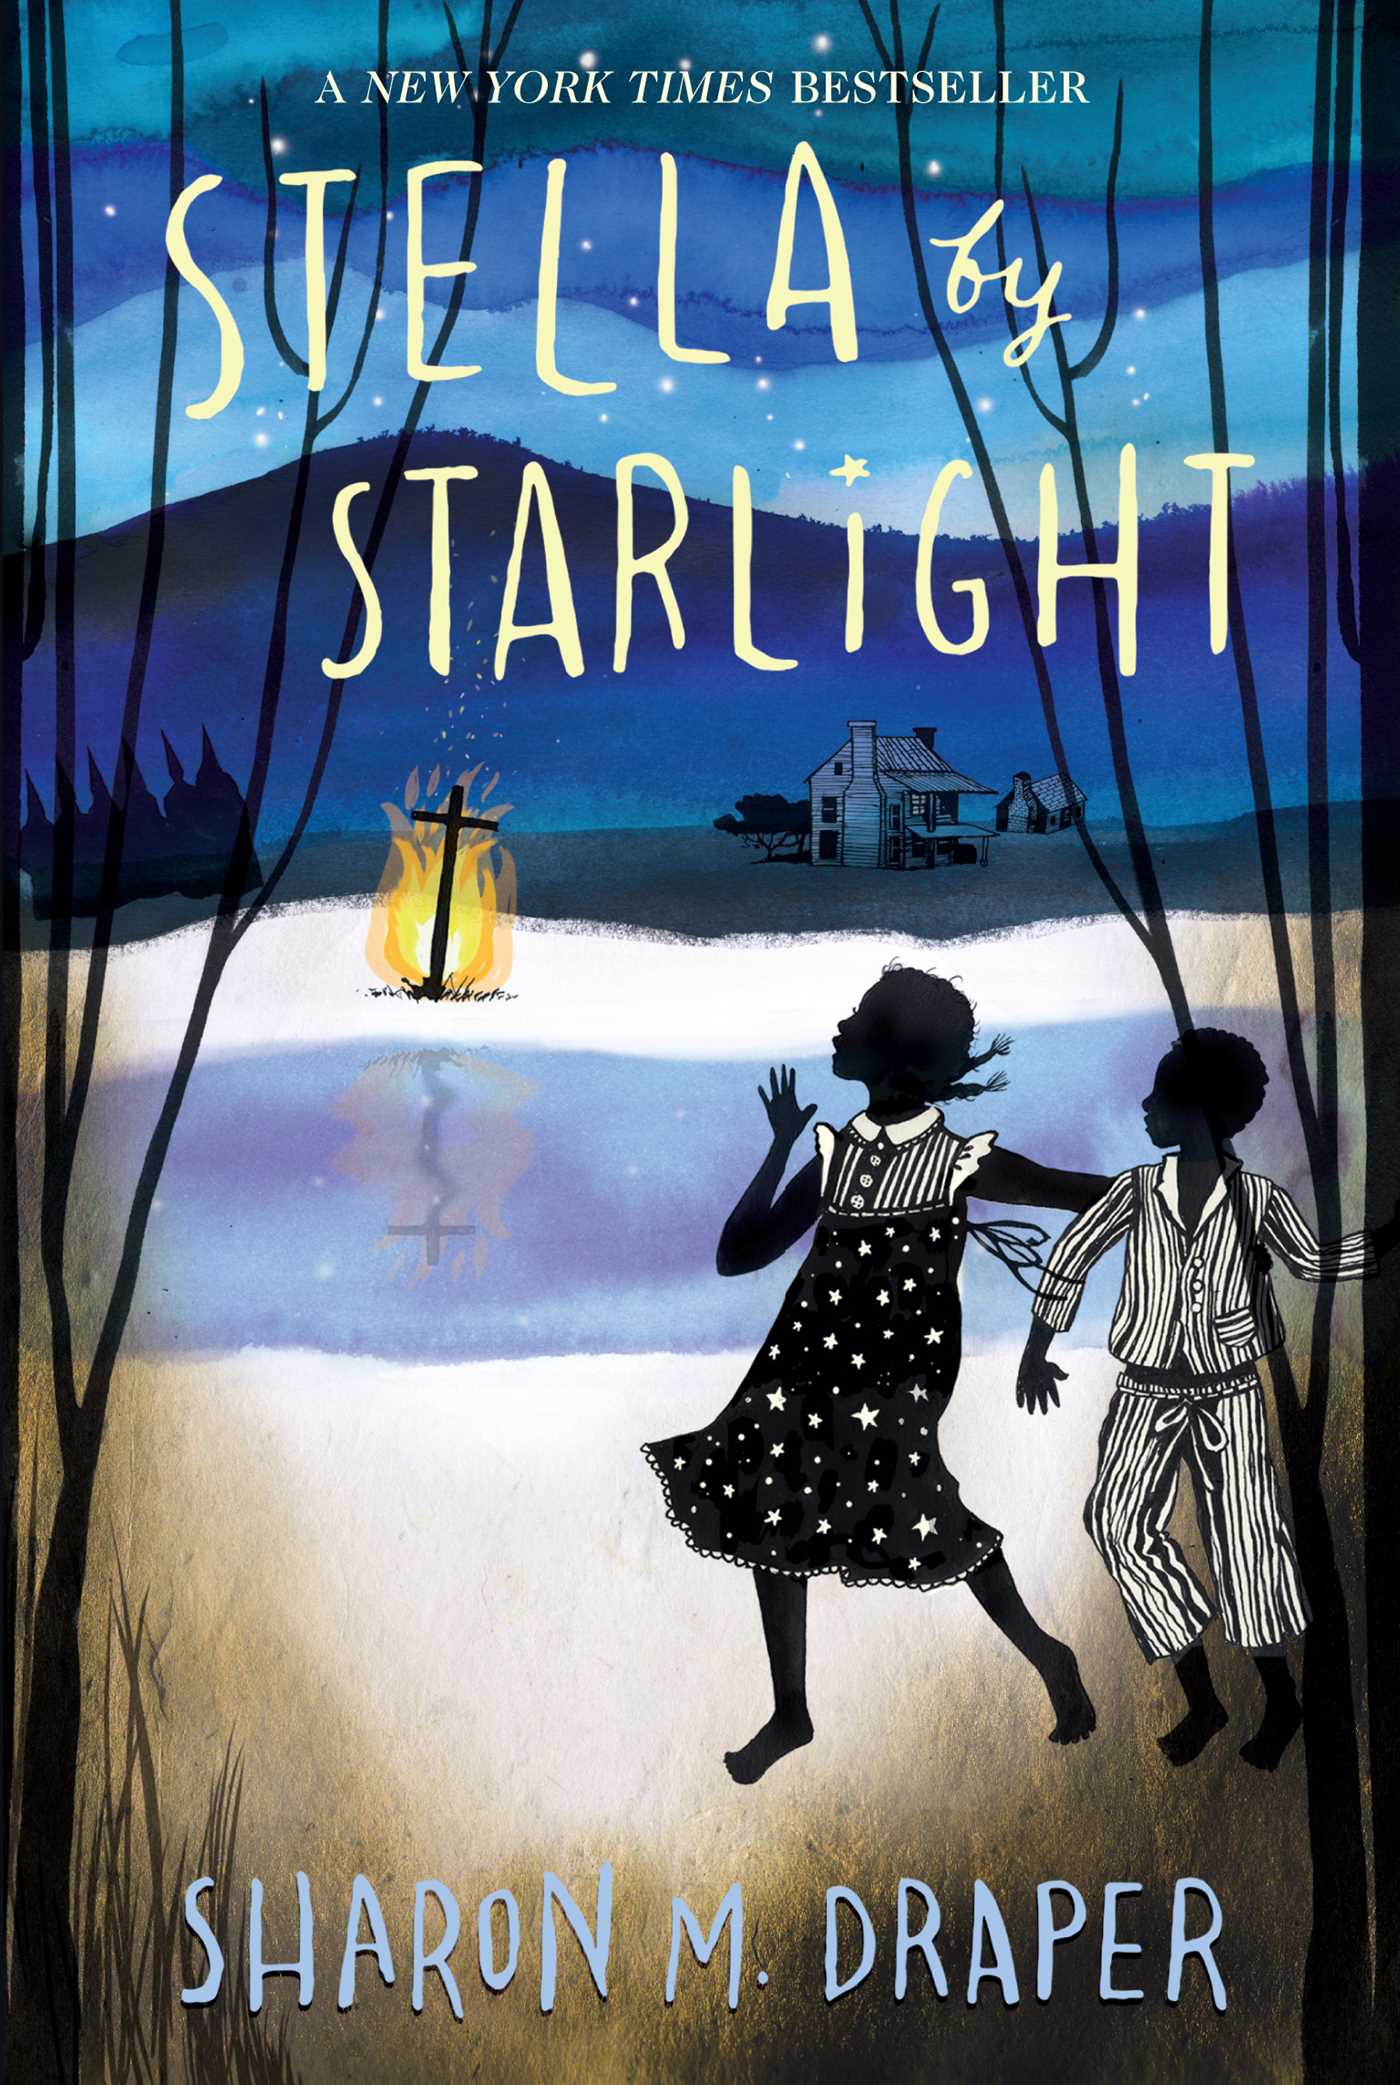 Cover illustration for "Stella by Starlight" - two silhouettes in front of a night landscape